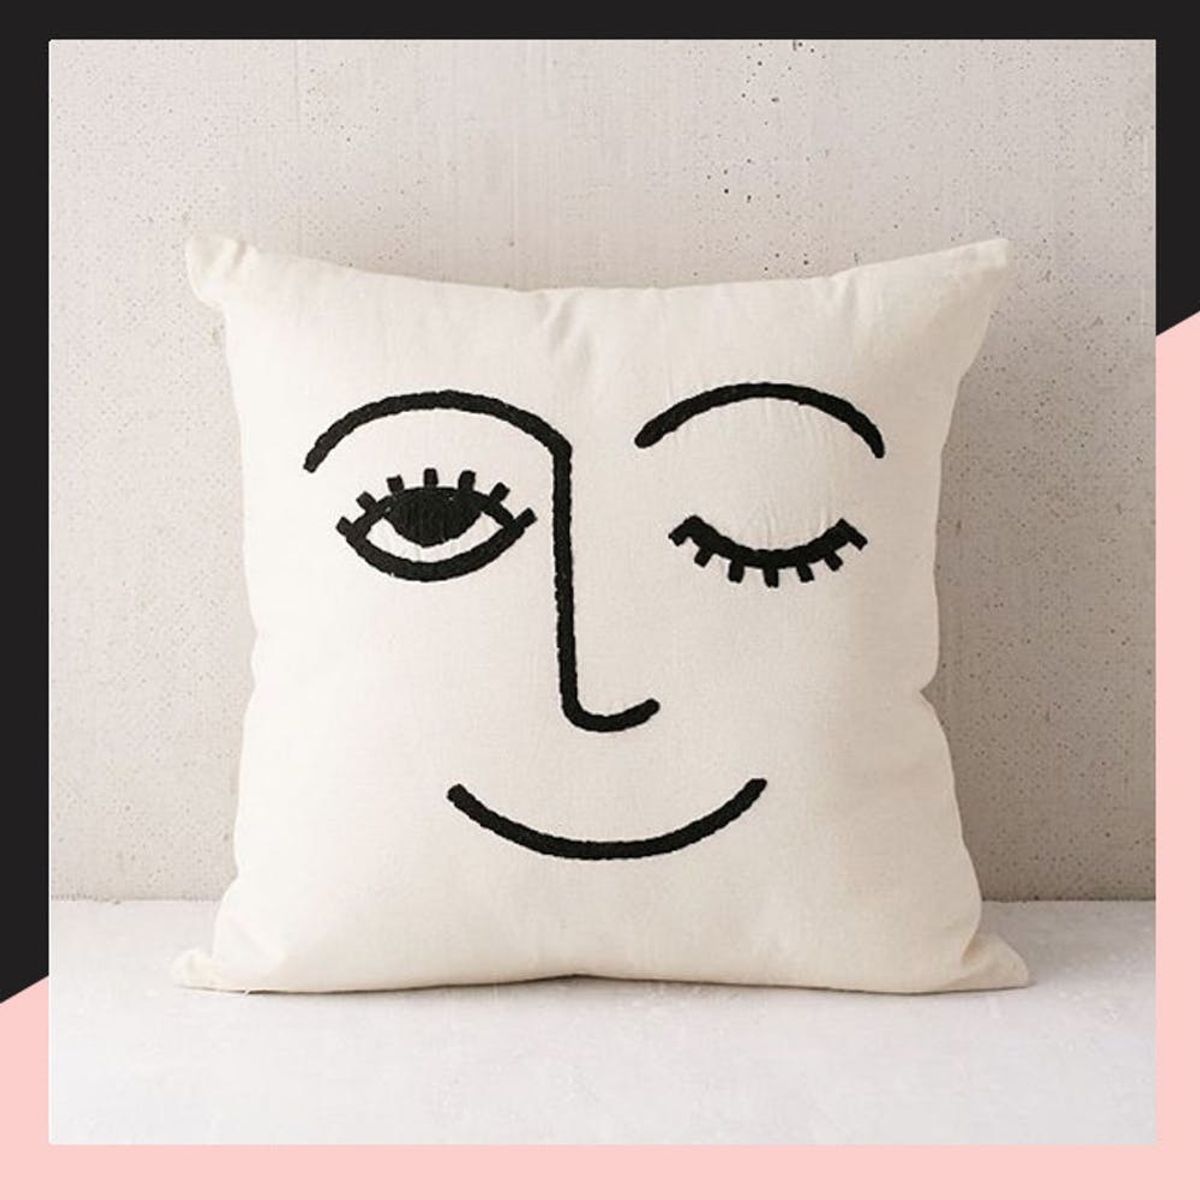 17 of the Best Buys for Your Home We Found in Urban Outfitters’ Flash Sale